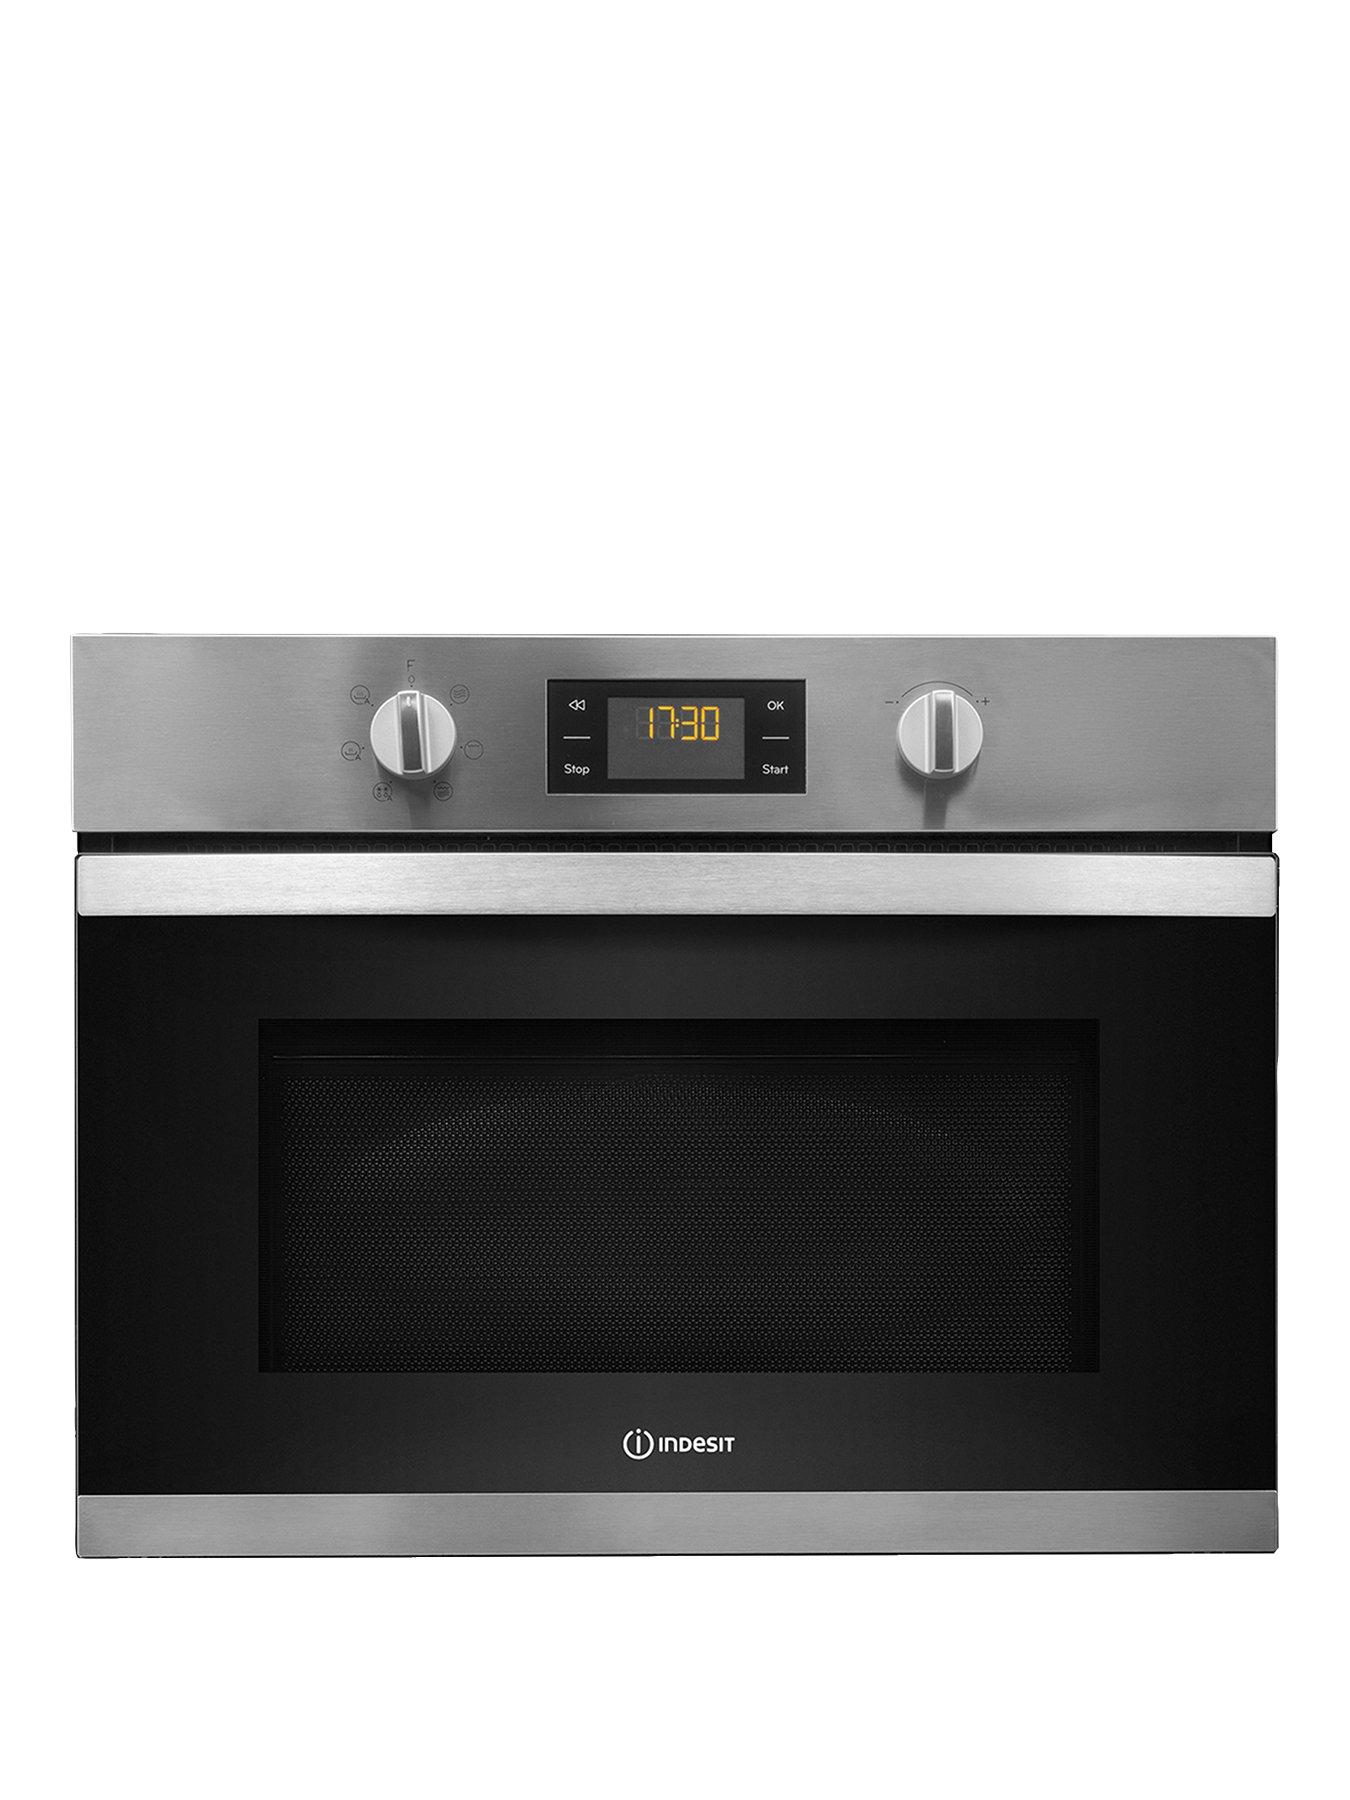 Indesit Aria Mwi3443Ix Built-In Microwave With Grill And Optional Installation – Stainless Steel – Microwave Only